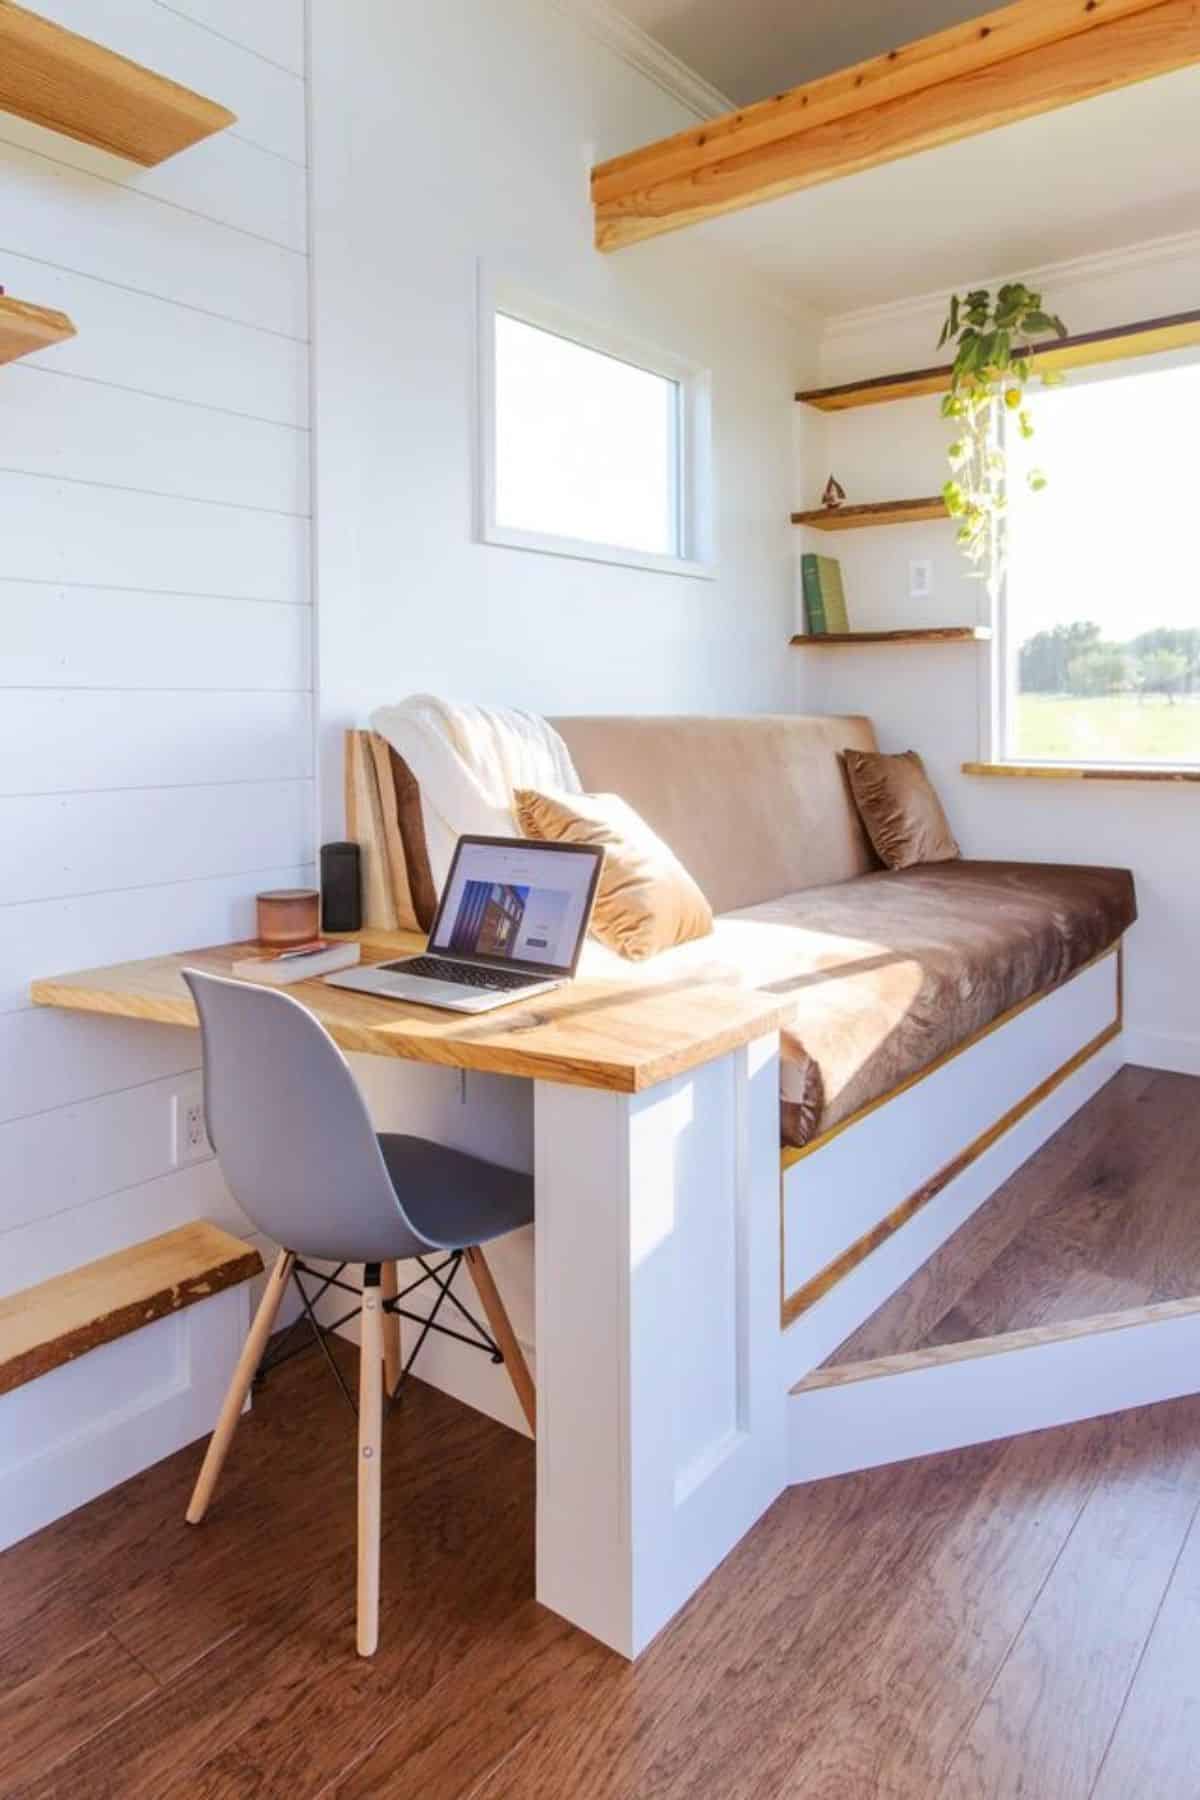 Comfortable and convertible couch in living area of one bedroom tiny home